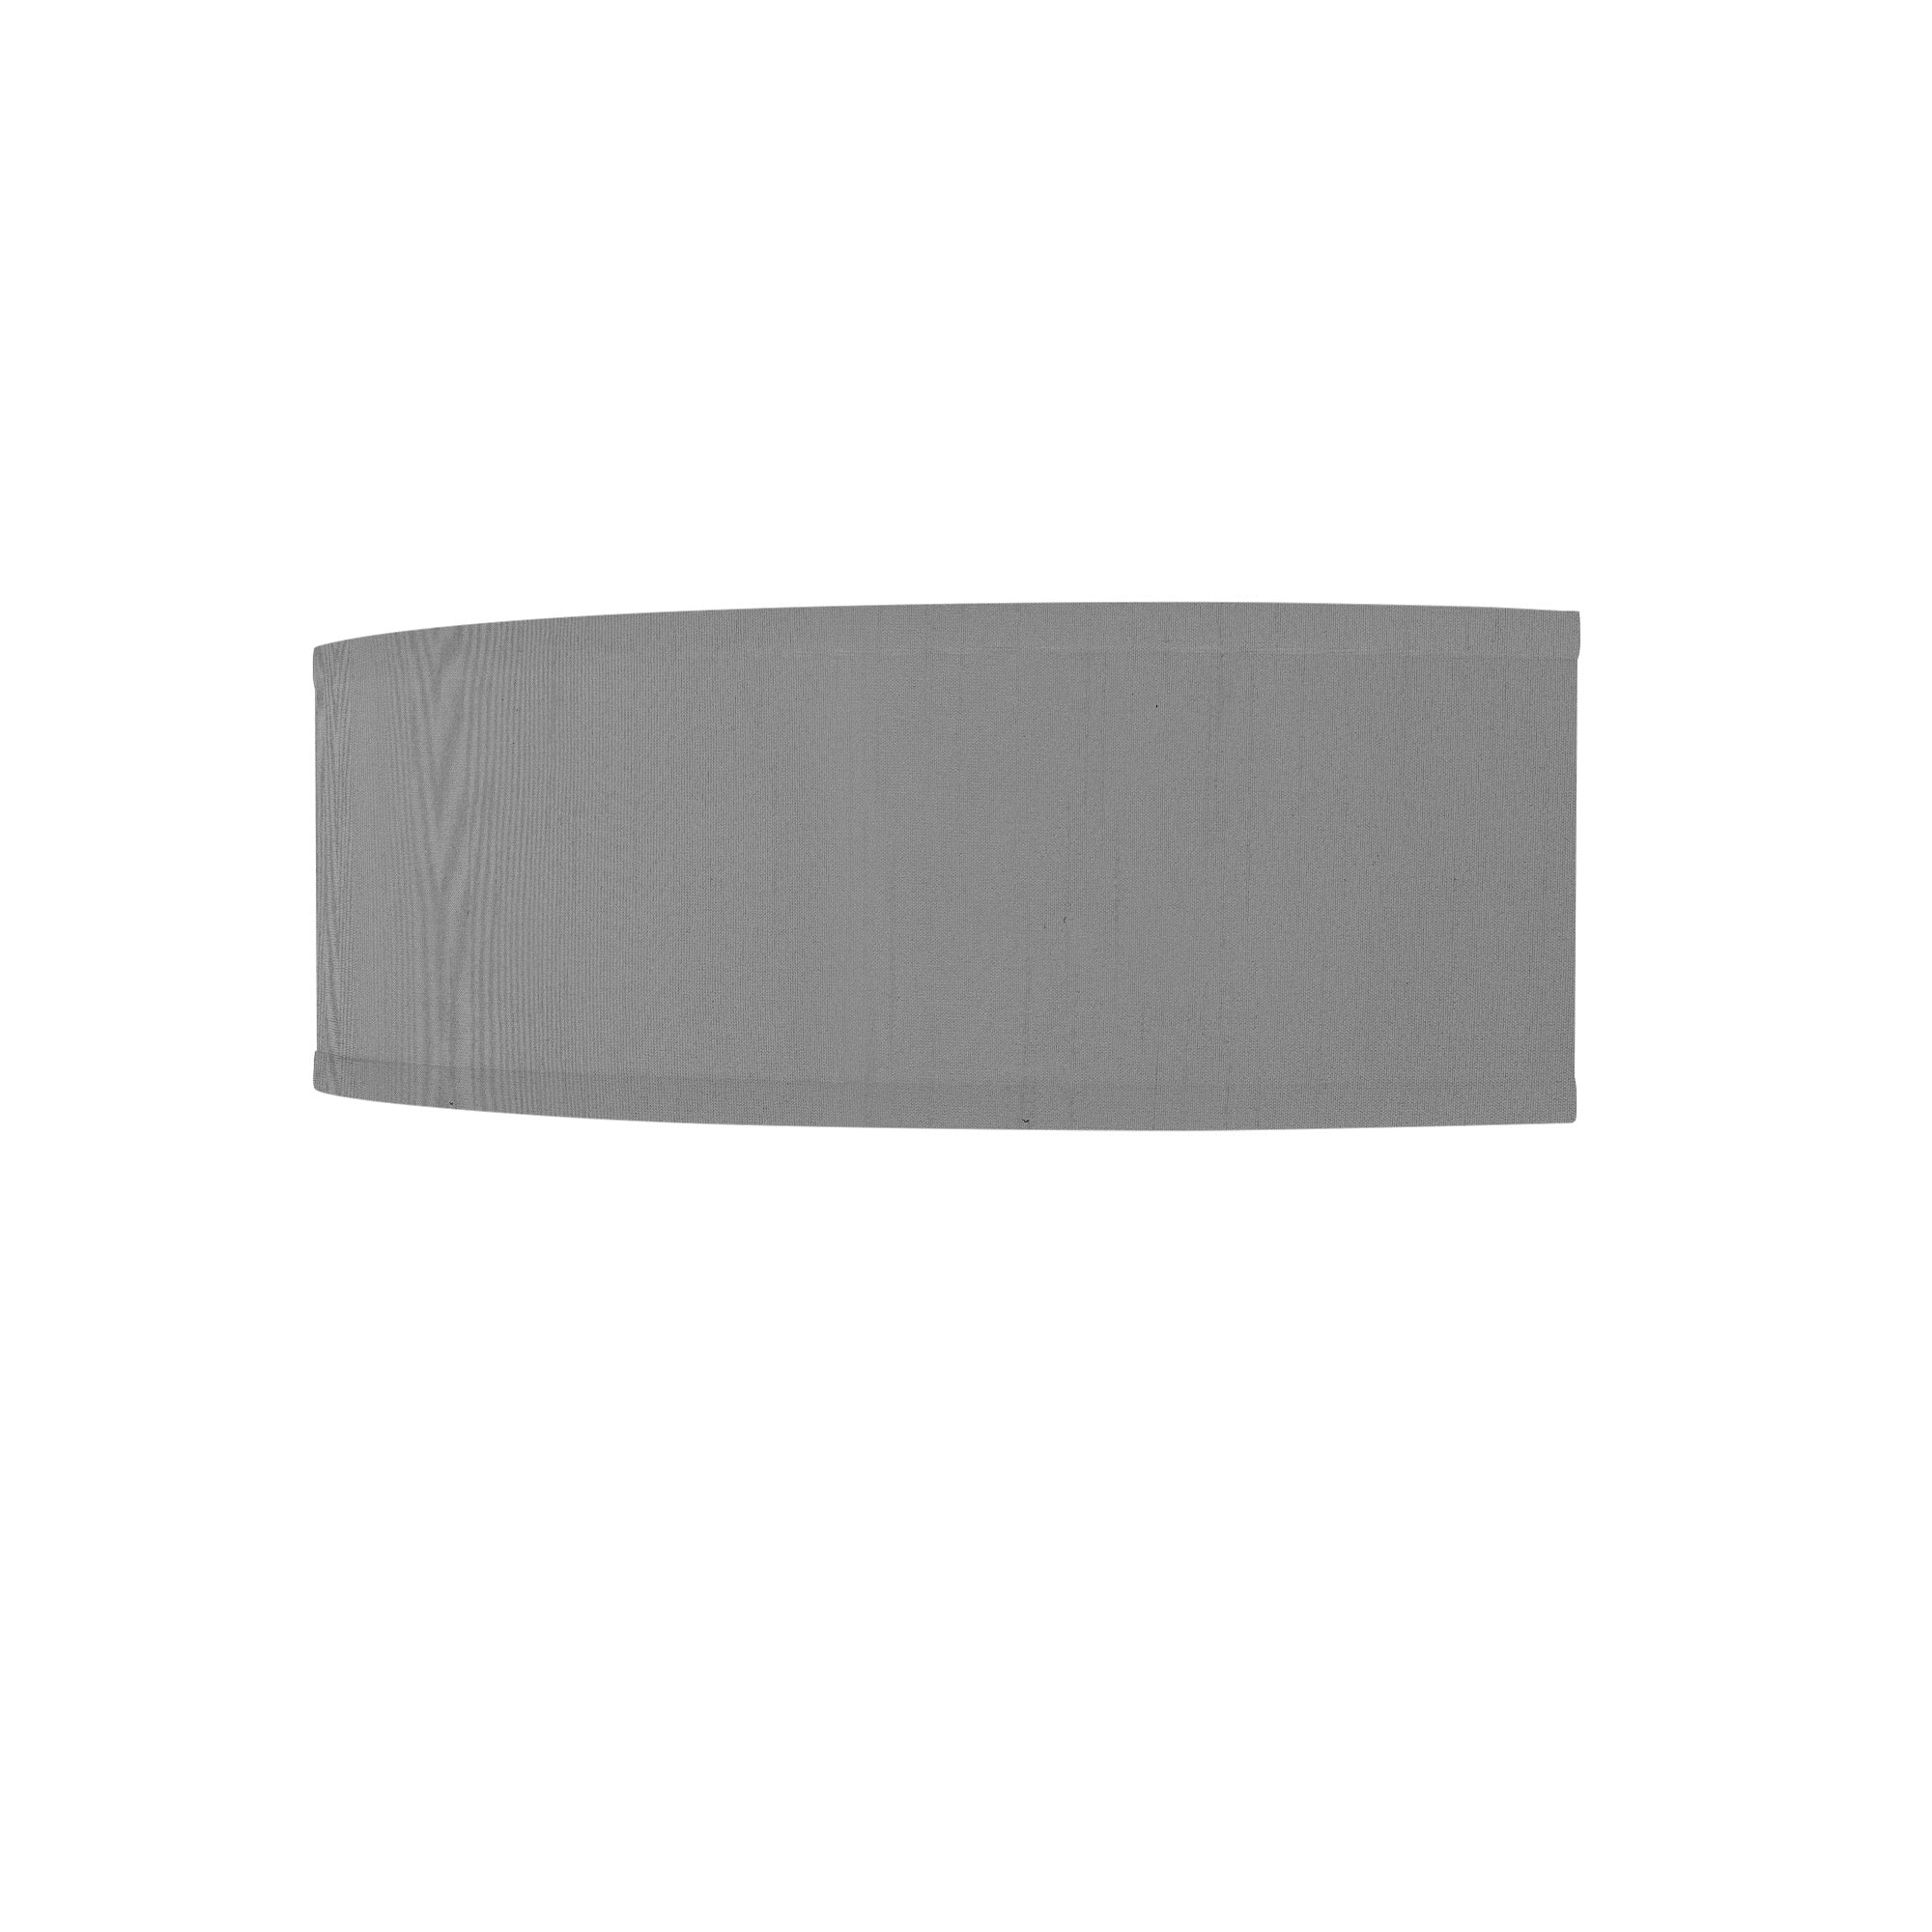 The Mora Wall Sconce from Seascape Fixtures with a silk shade in gunmetal color.